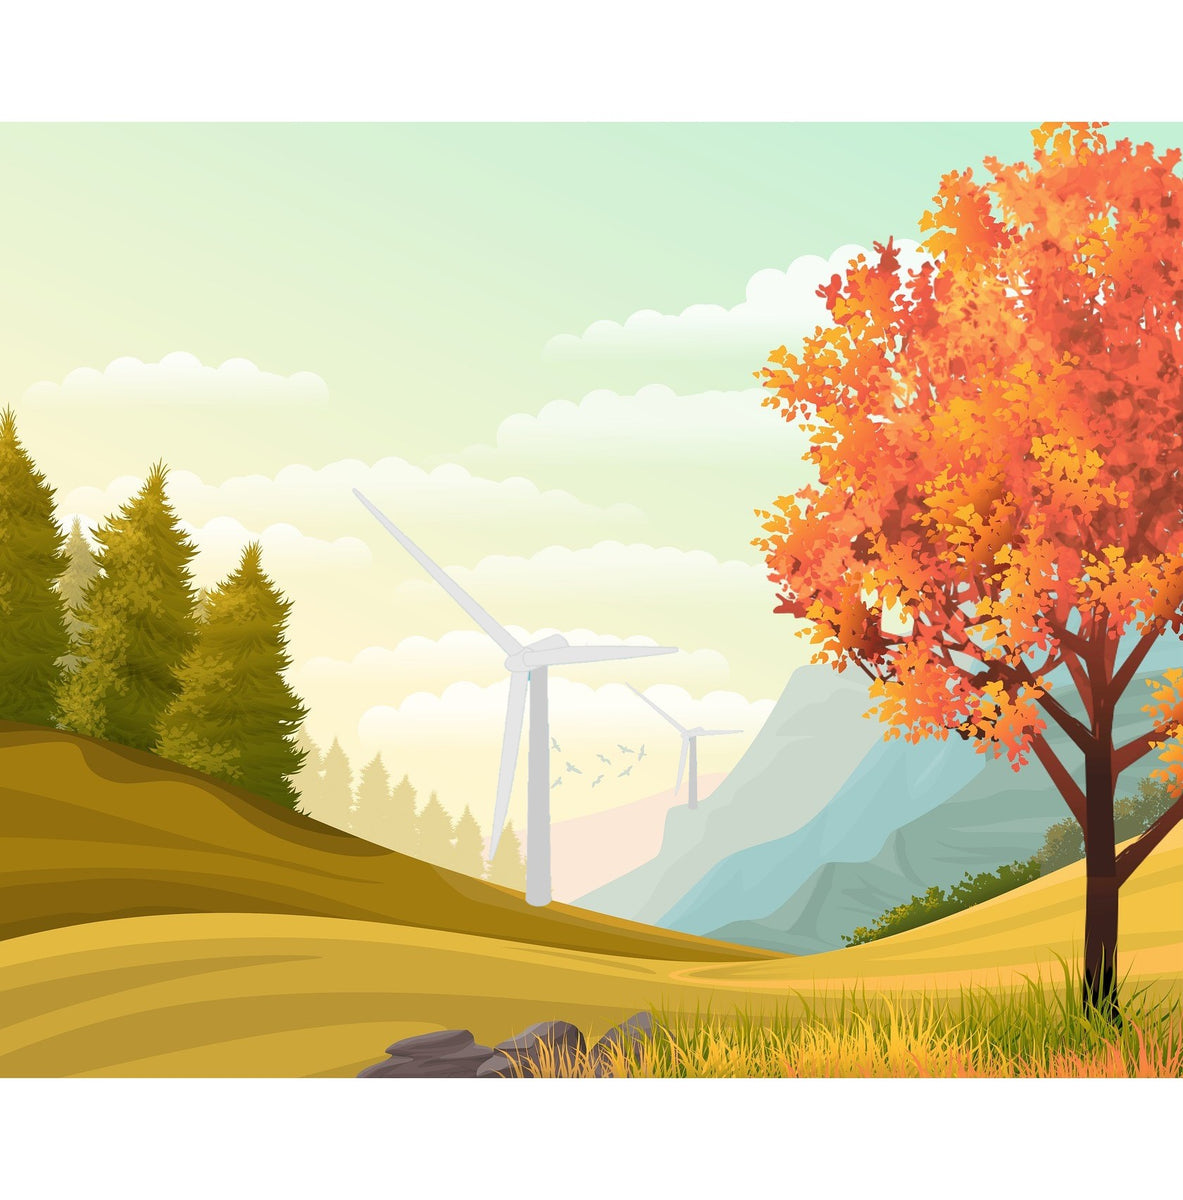 Image of an autumn valley with green pine trees on the left, a large wind turbine in the middle, and a red orange tree in the foreground on the right.  It is a cloudy sky with green and brown grass in the foreground.